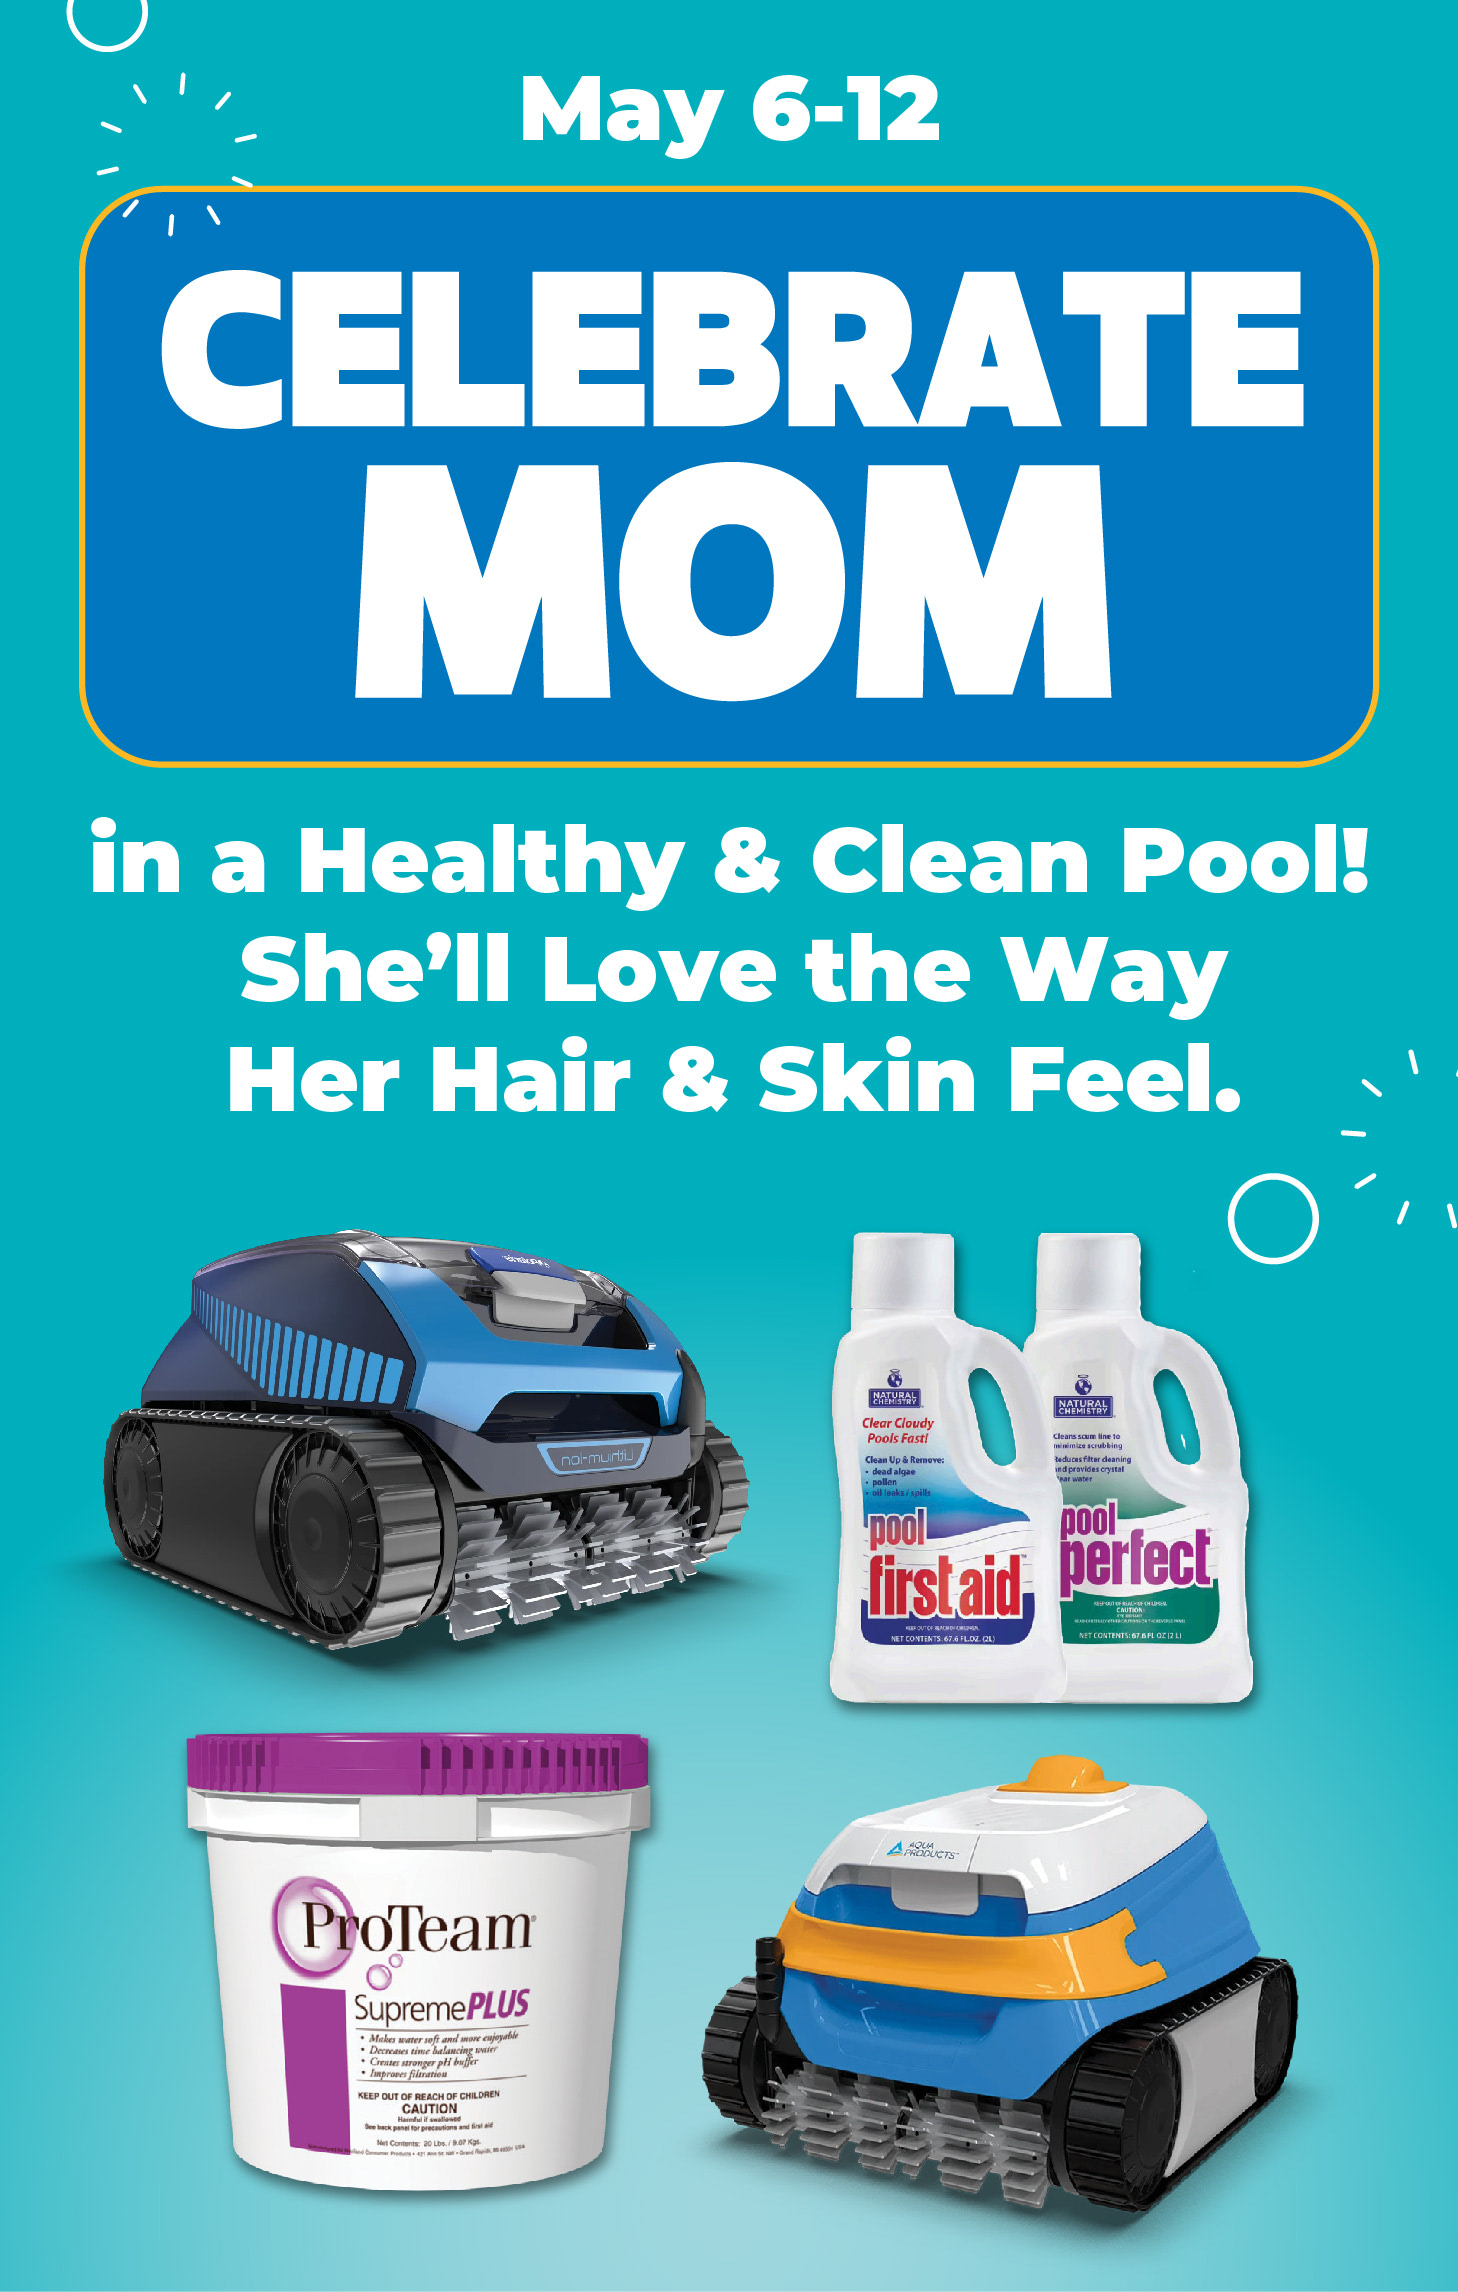 Mother Days - Robotic Cleaners and Pool Chemicals